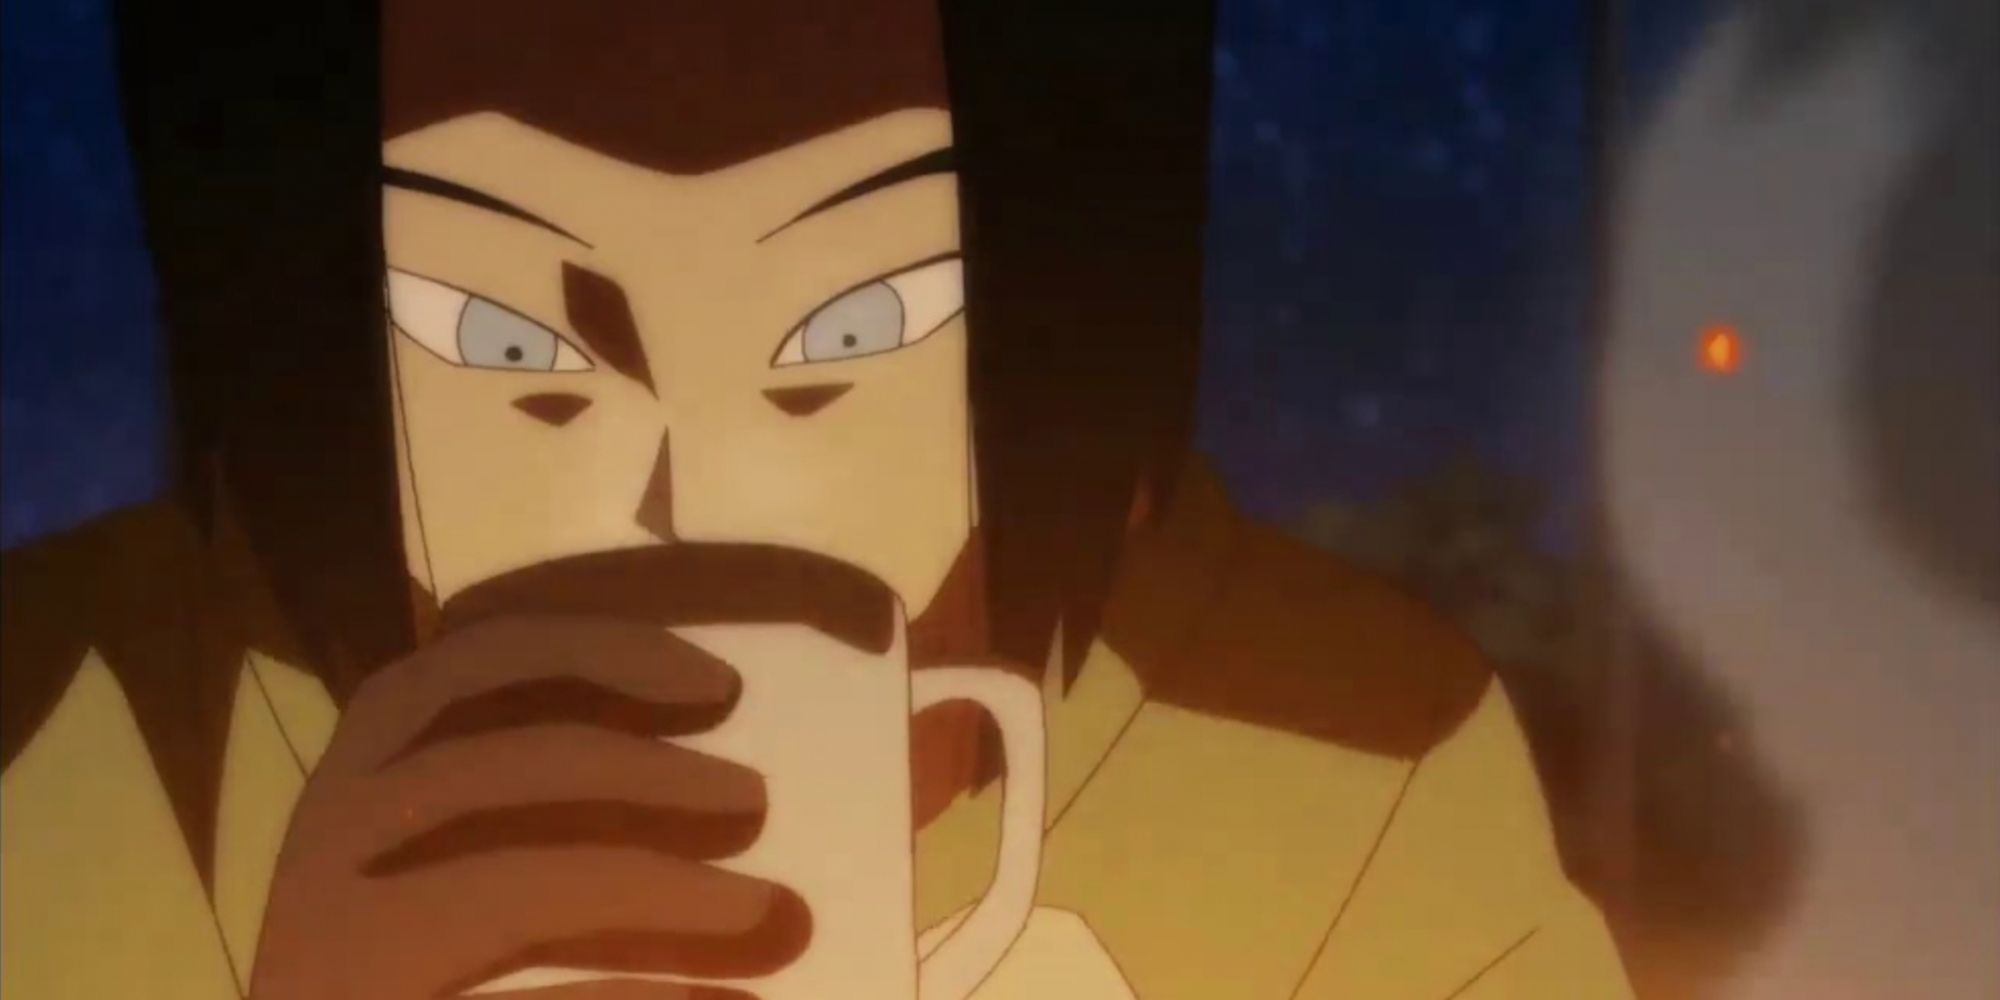 Android 17 enjoys a hot drink and reflects upon his family in Dragon Ball Super